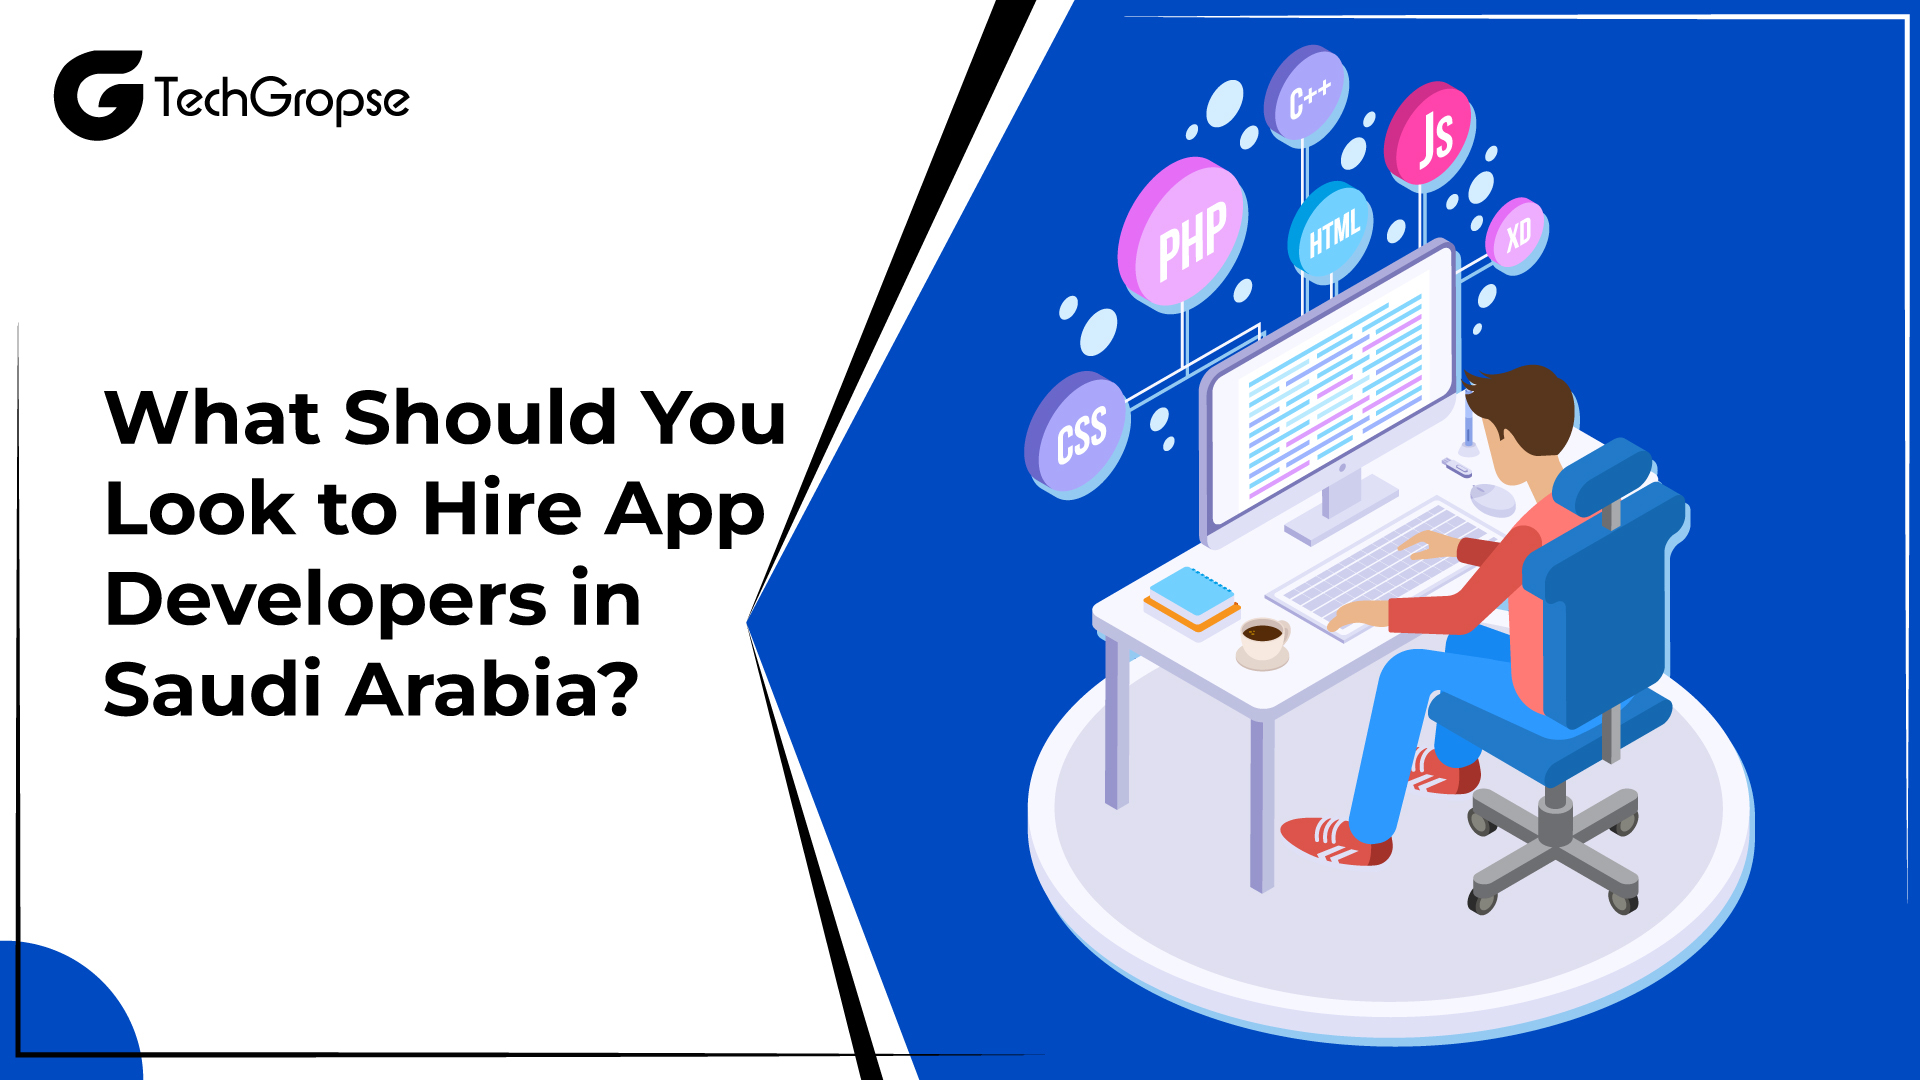 What Should You Look to Hire App Developers in Saudi Arabia?